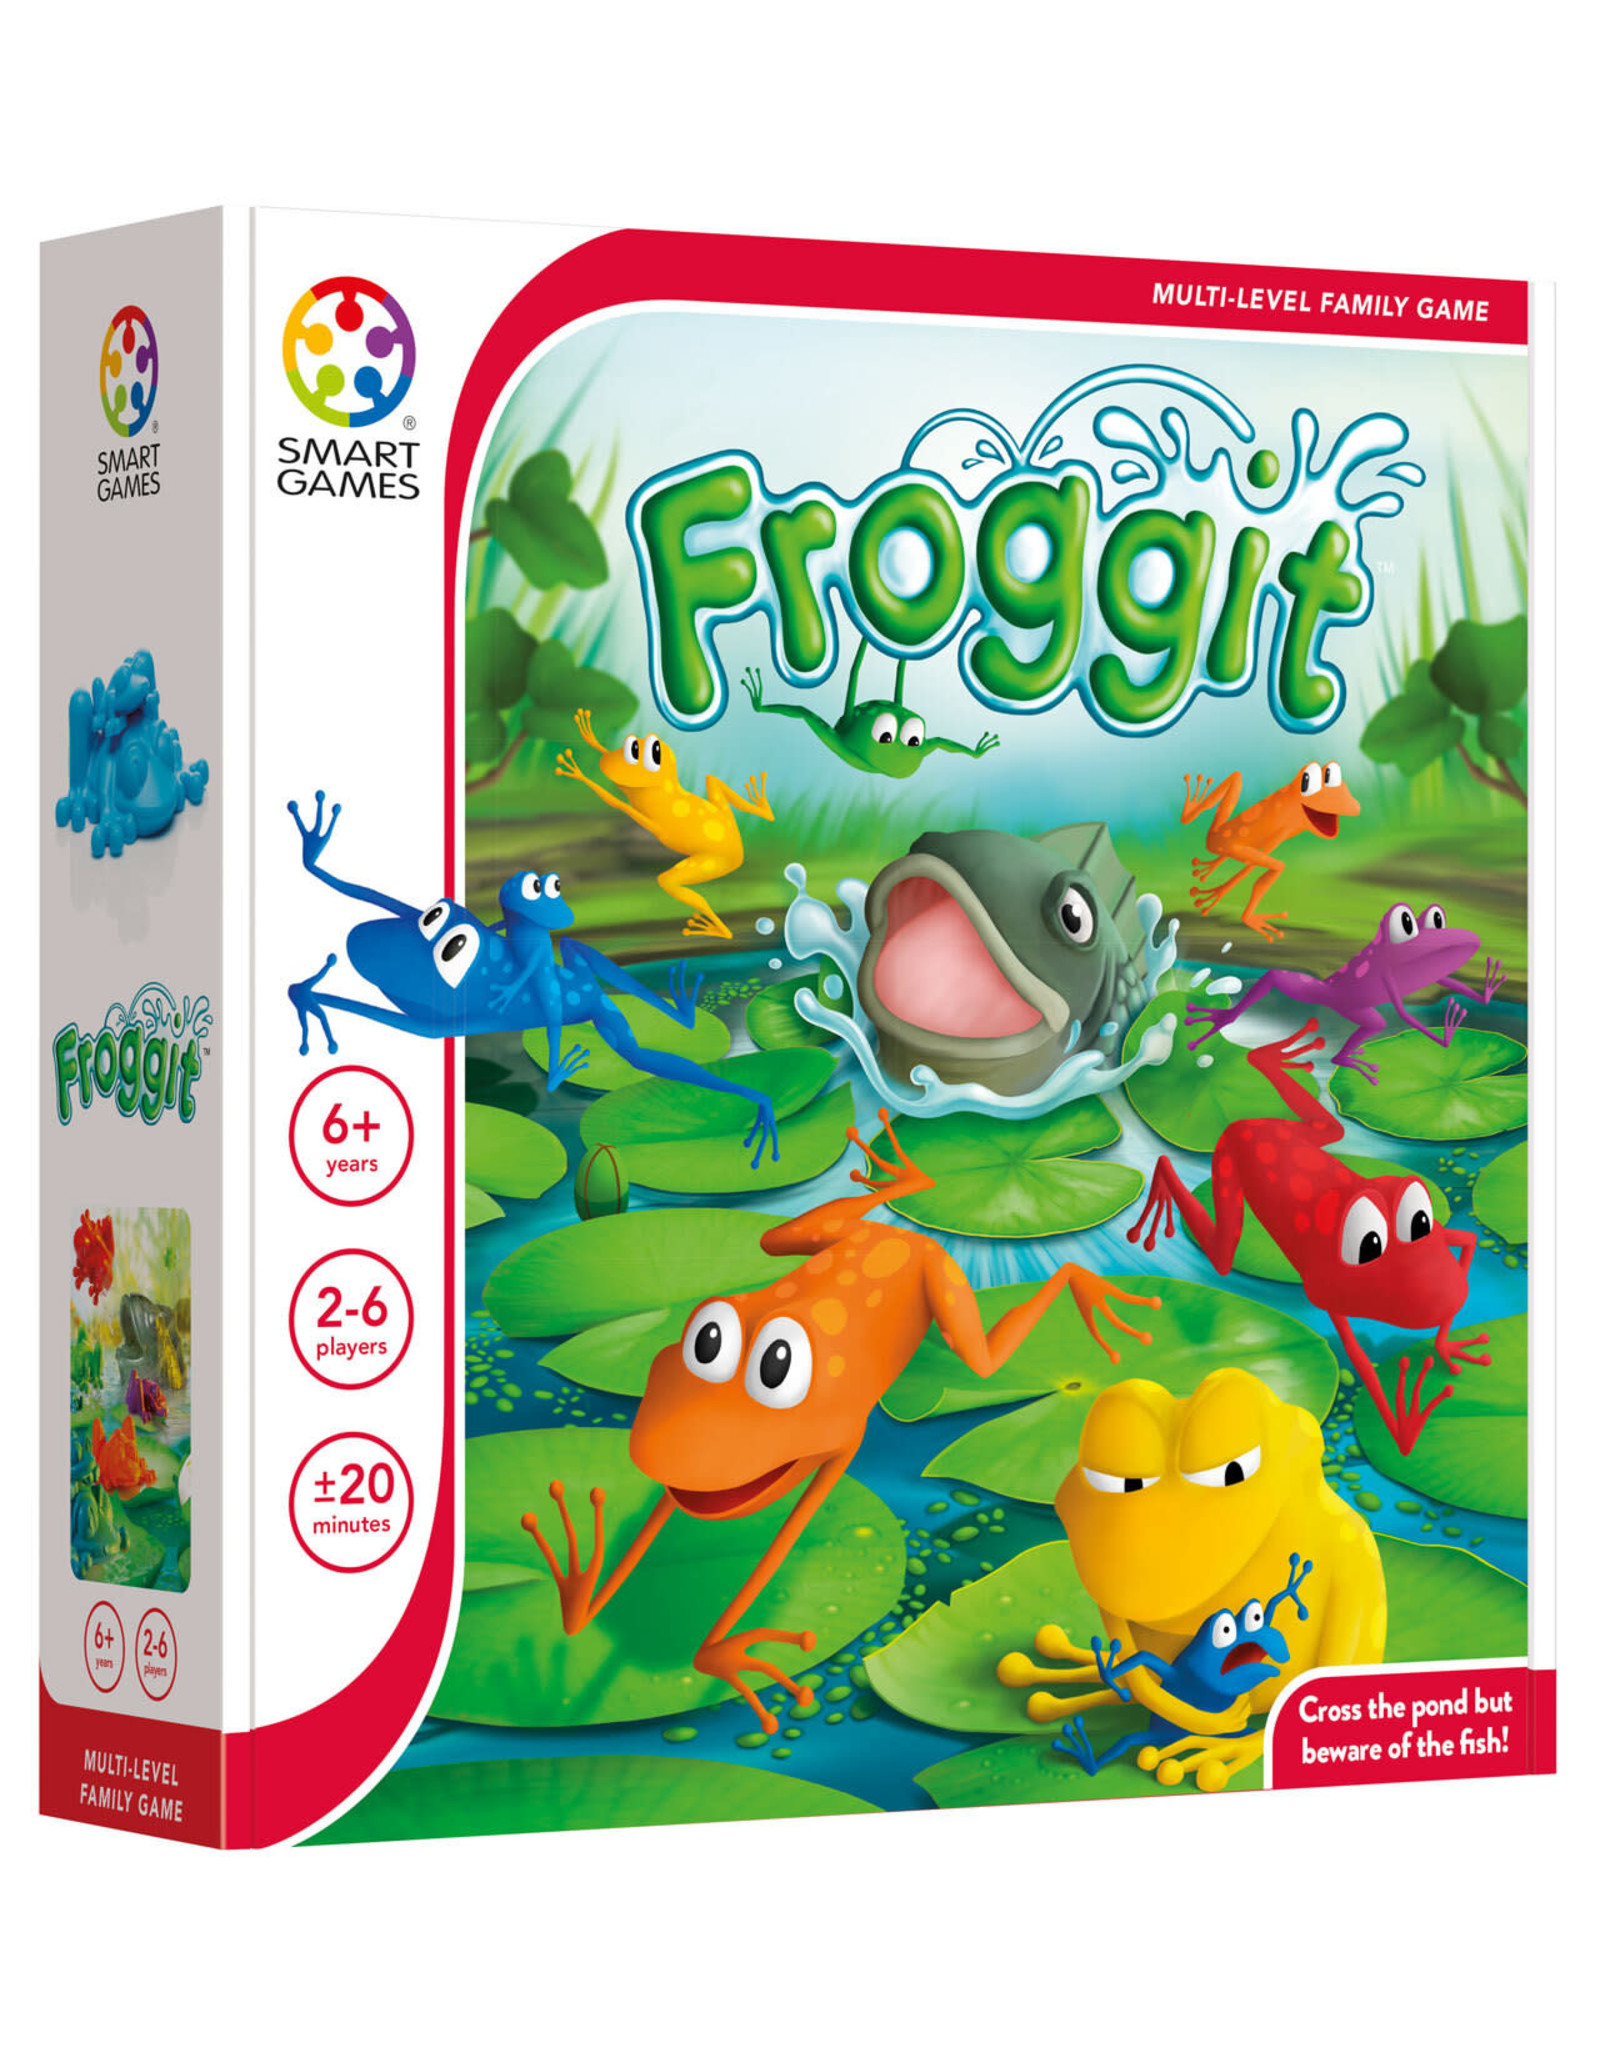 SmartGames Smart Games Family Game - Froggit